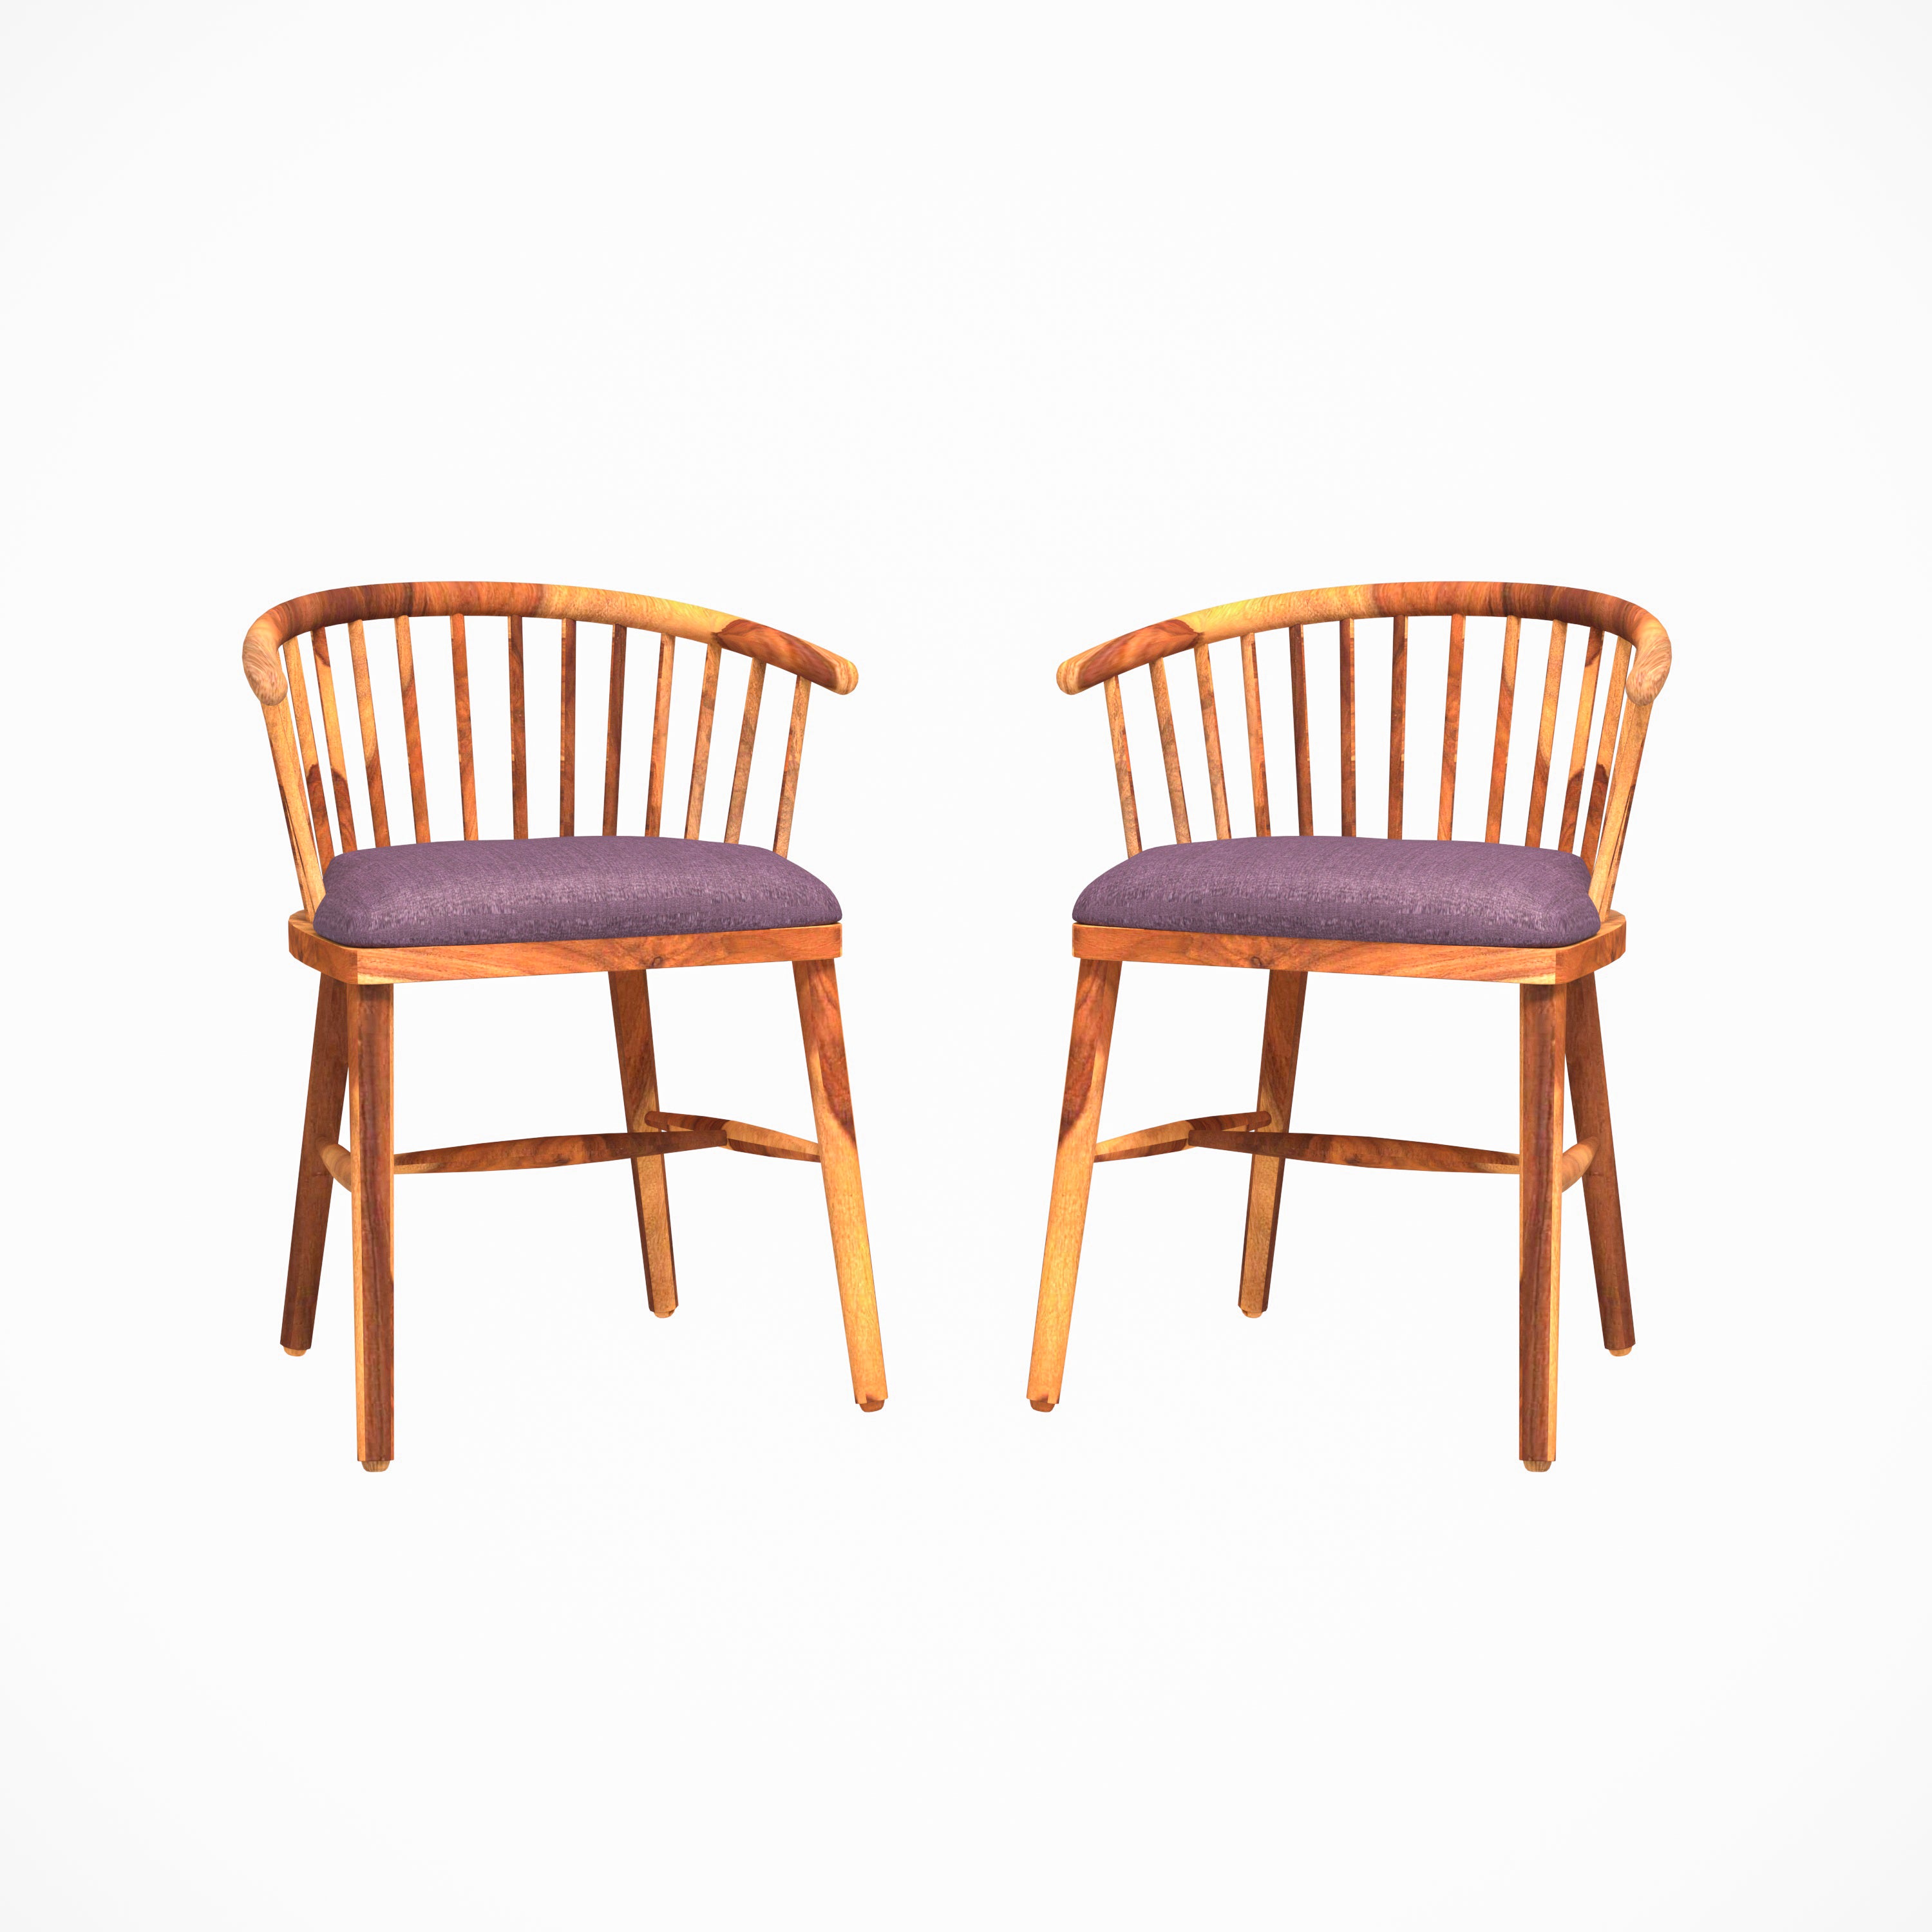 Classic Curved Back Wooden Handmade Chair Set of 2 for Home Arm Chair